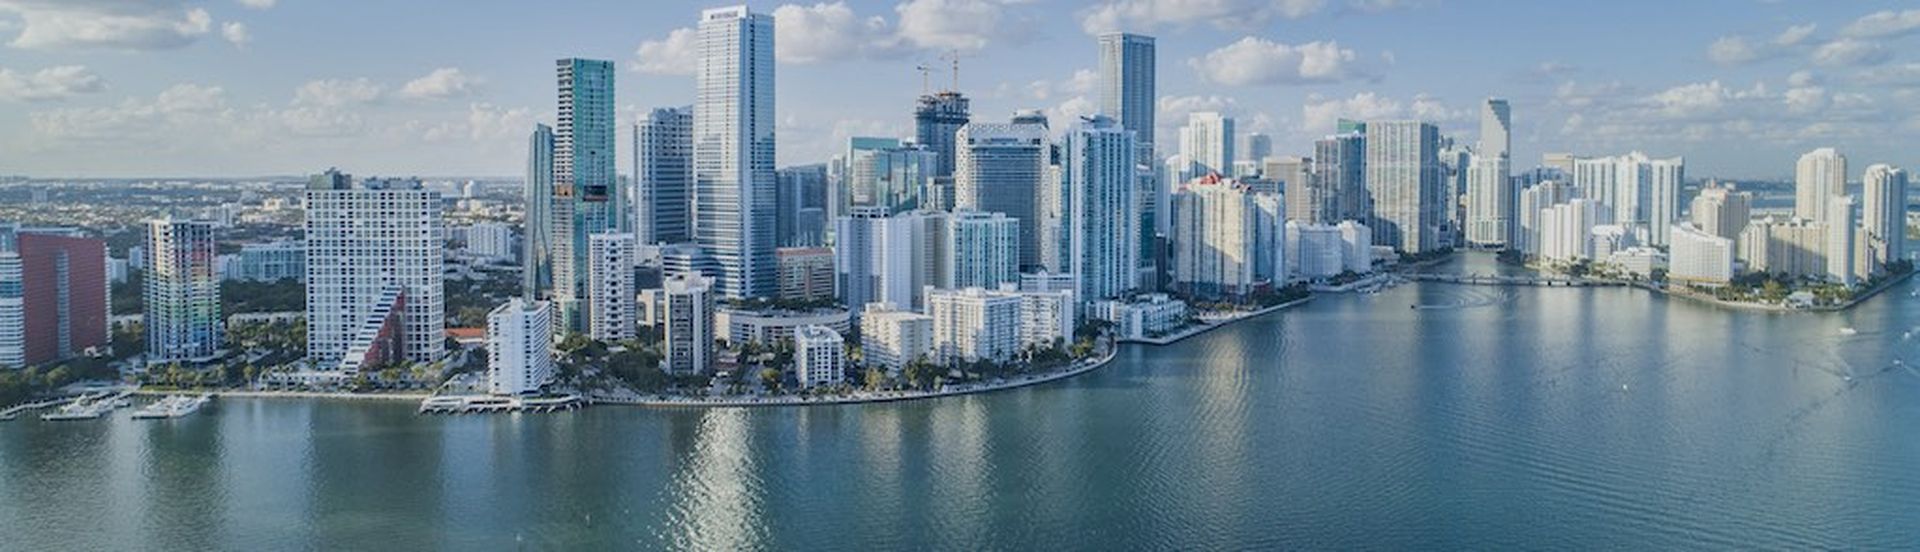 An aerial shot of Brickell Key, with downtown cityscape.